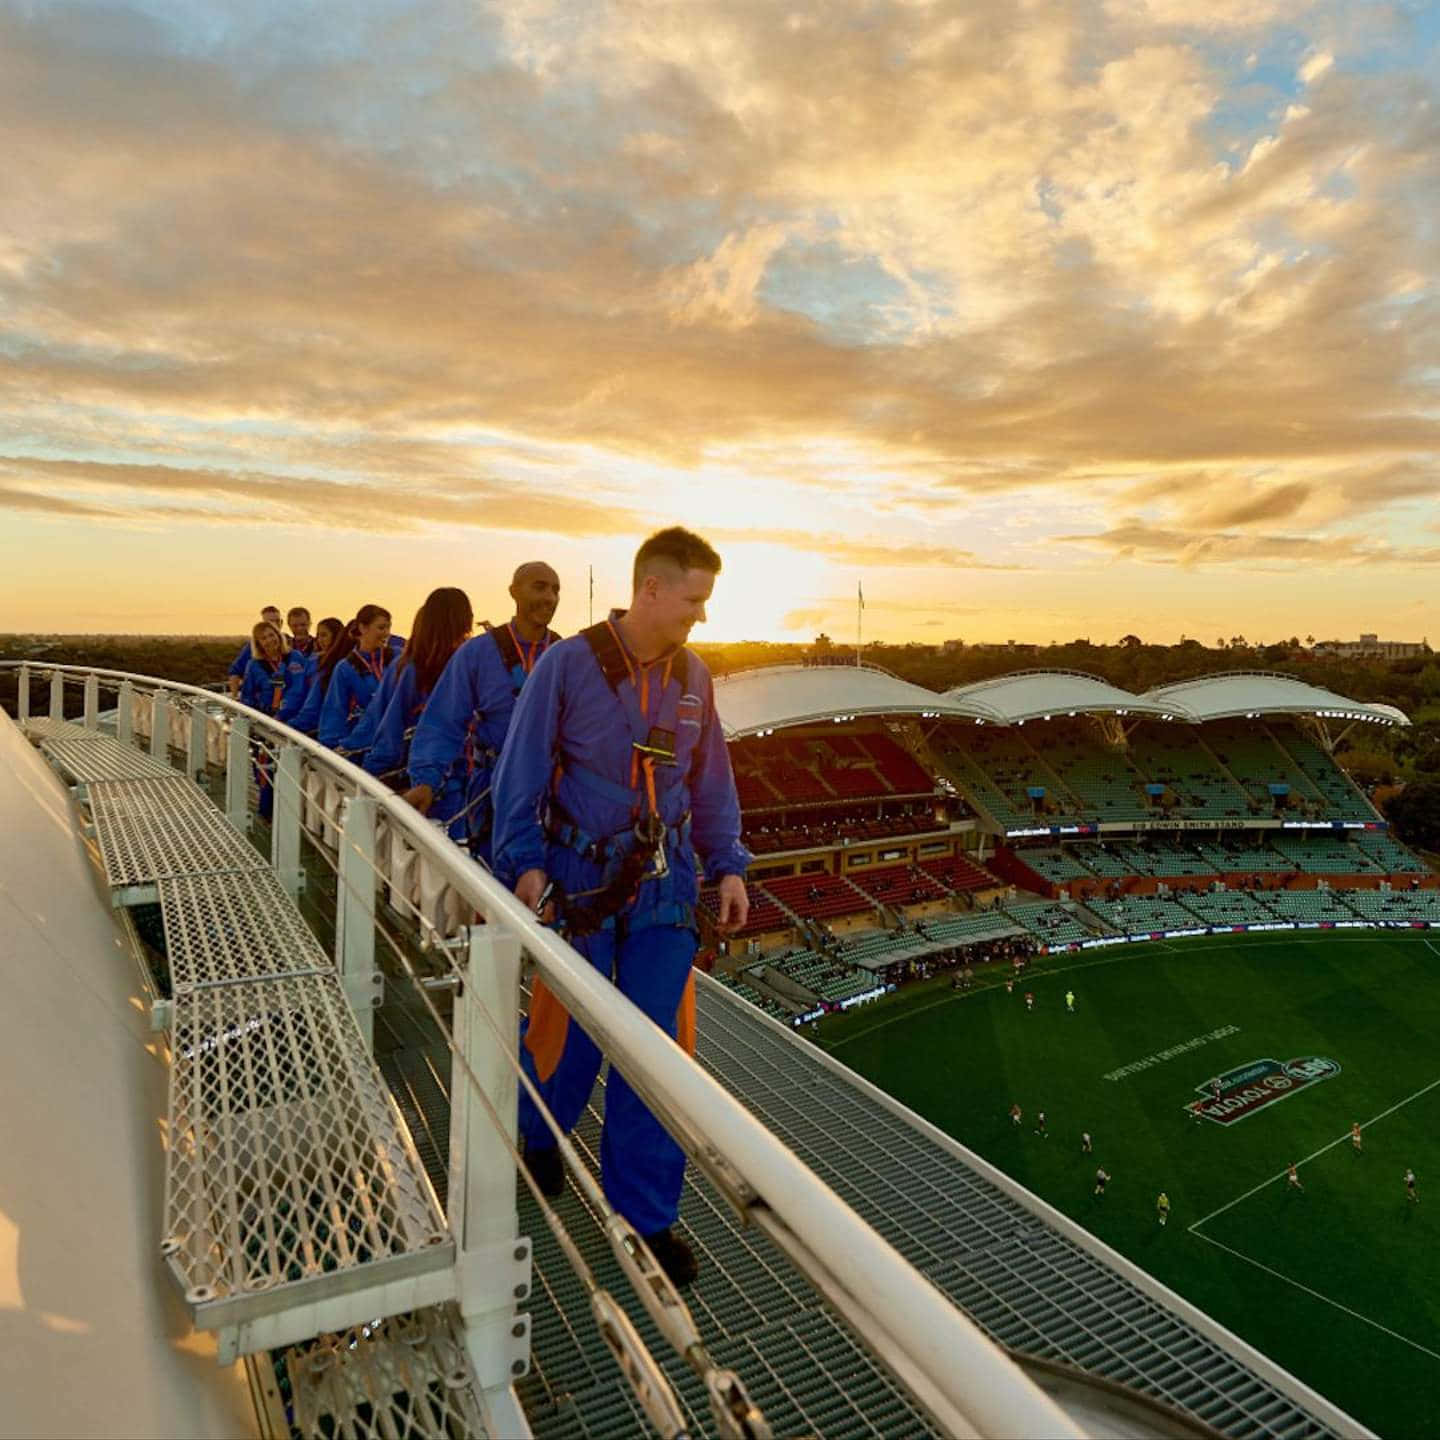 Adelaide Oval Roof Climb Sunset Wallpaper